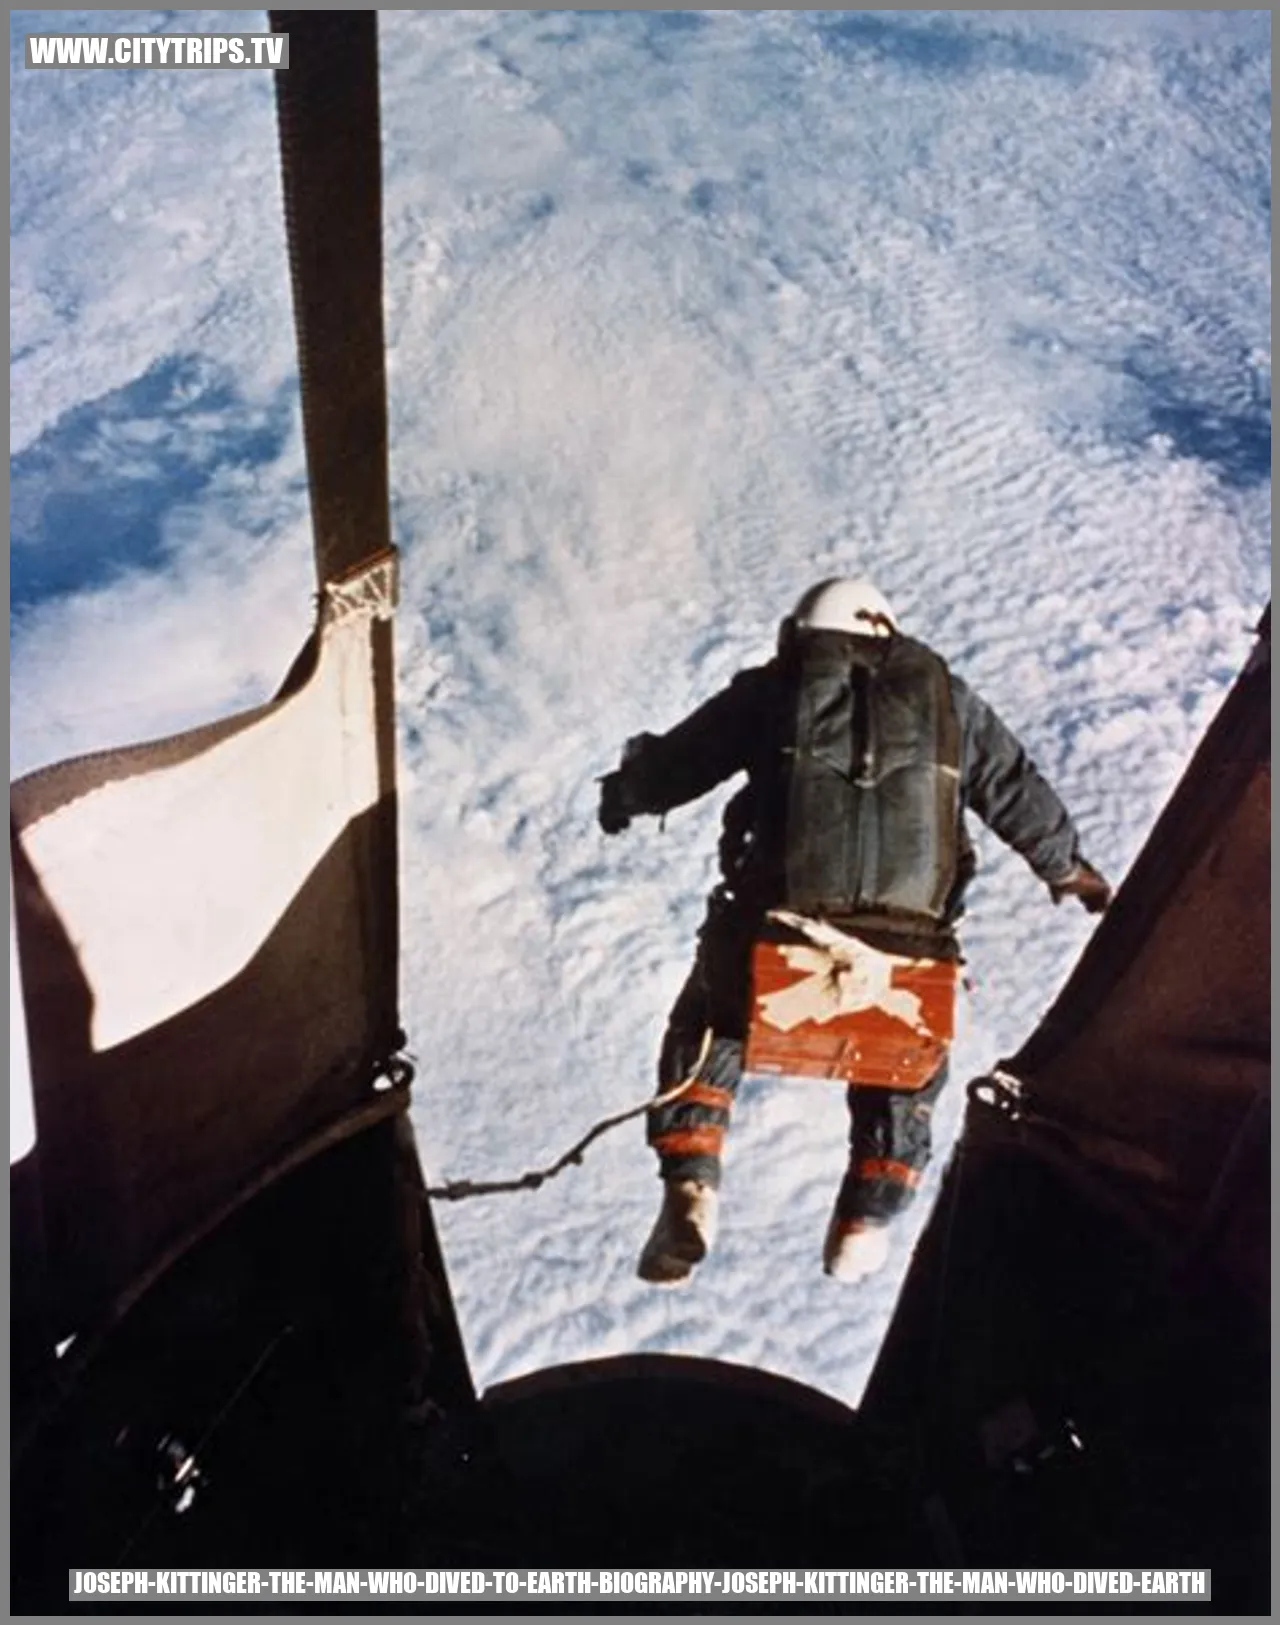 Joseph Kittinger: The Man Who Dived to Earth - Biography